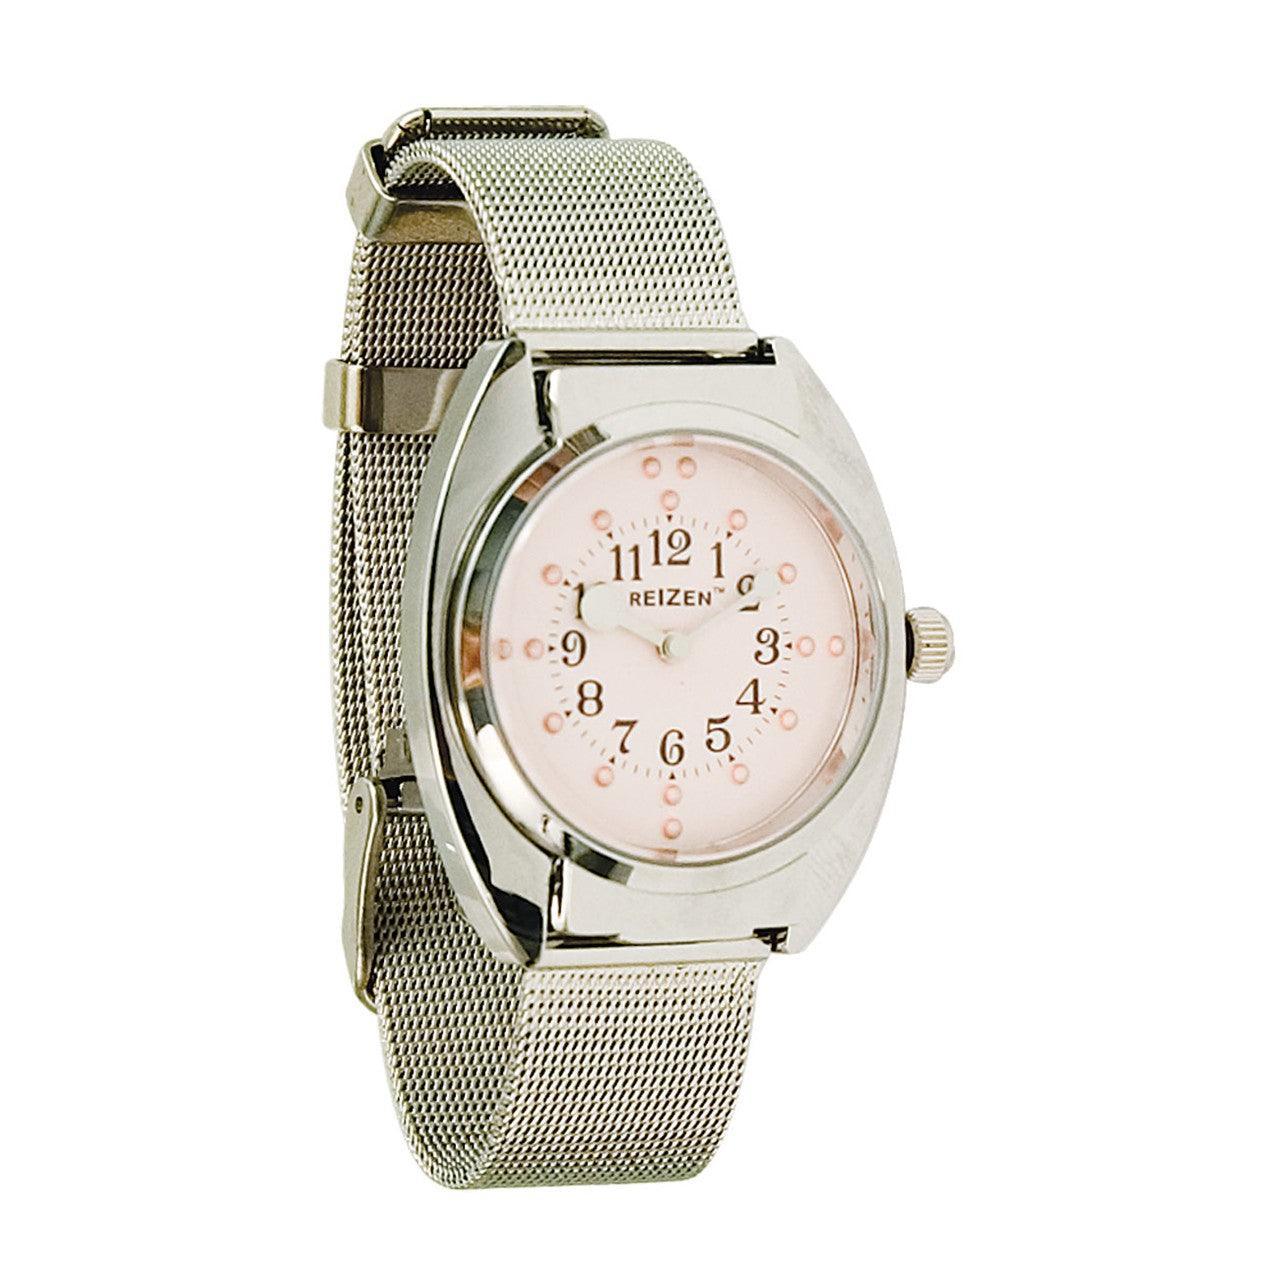 Ladies Braille Watch-Chrome-Steel Mesh Band-Pink Dial - The Low Vision Store